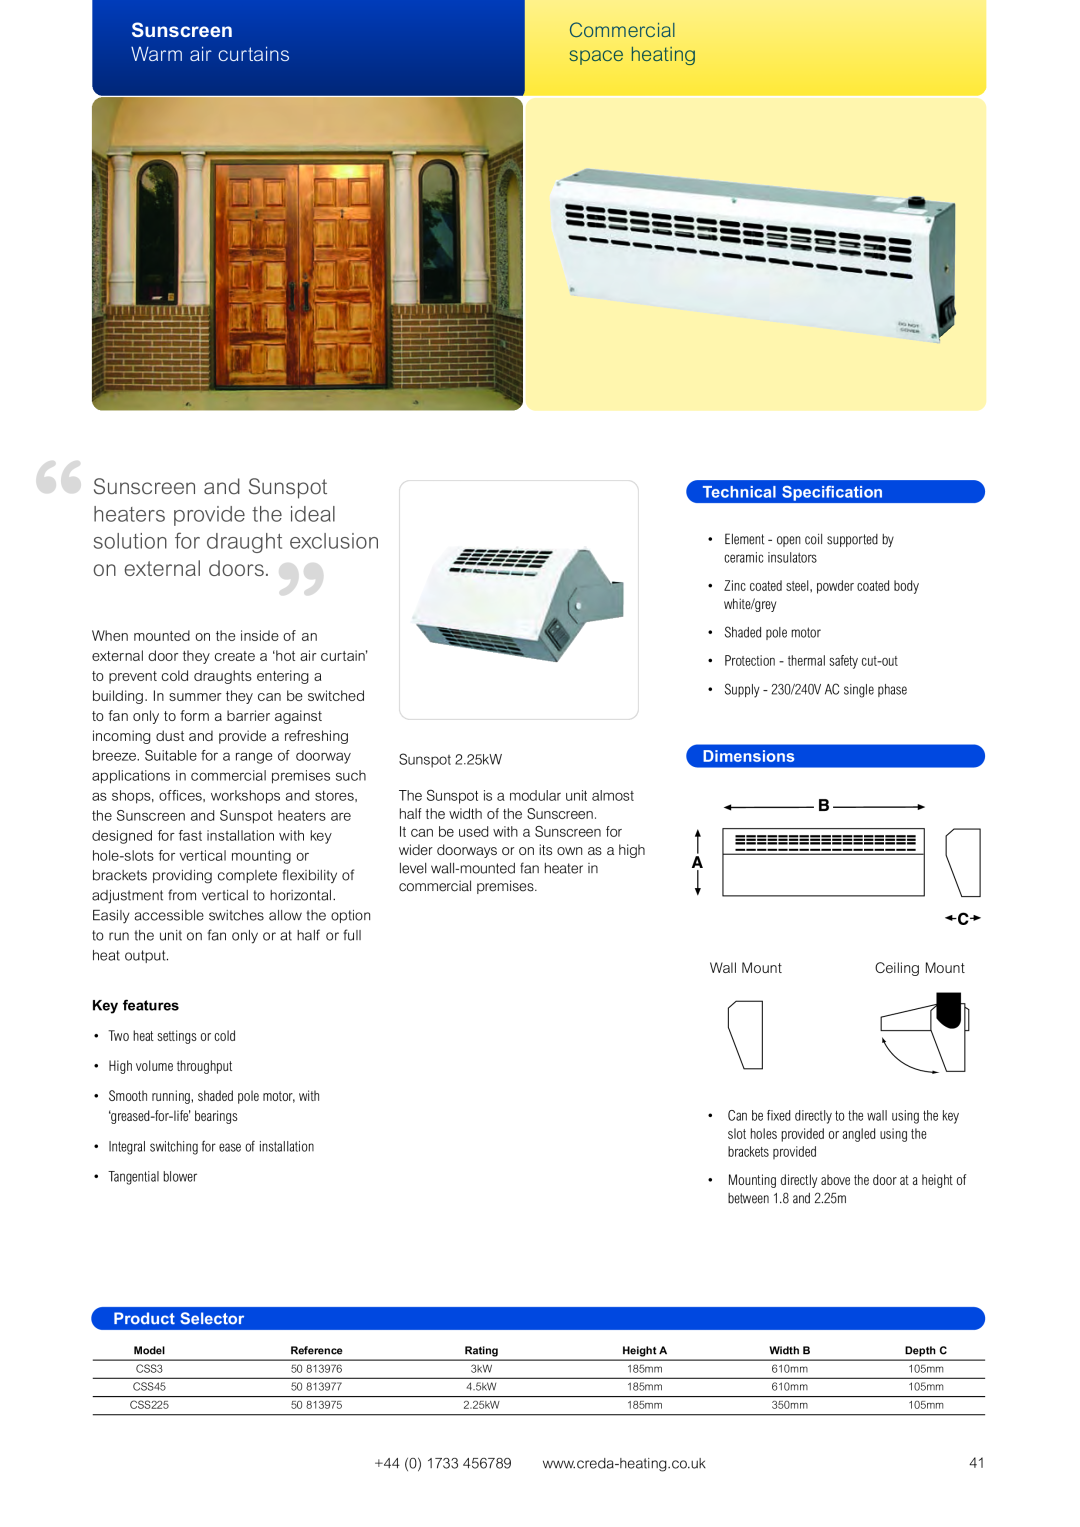 Creda Heating Solution manual Sunscreen, Warm air curtains, Commercial space heating, Technical Specification, Dimensions 